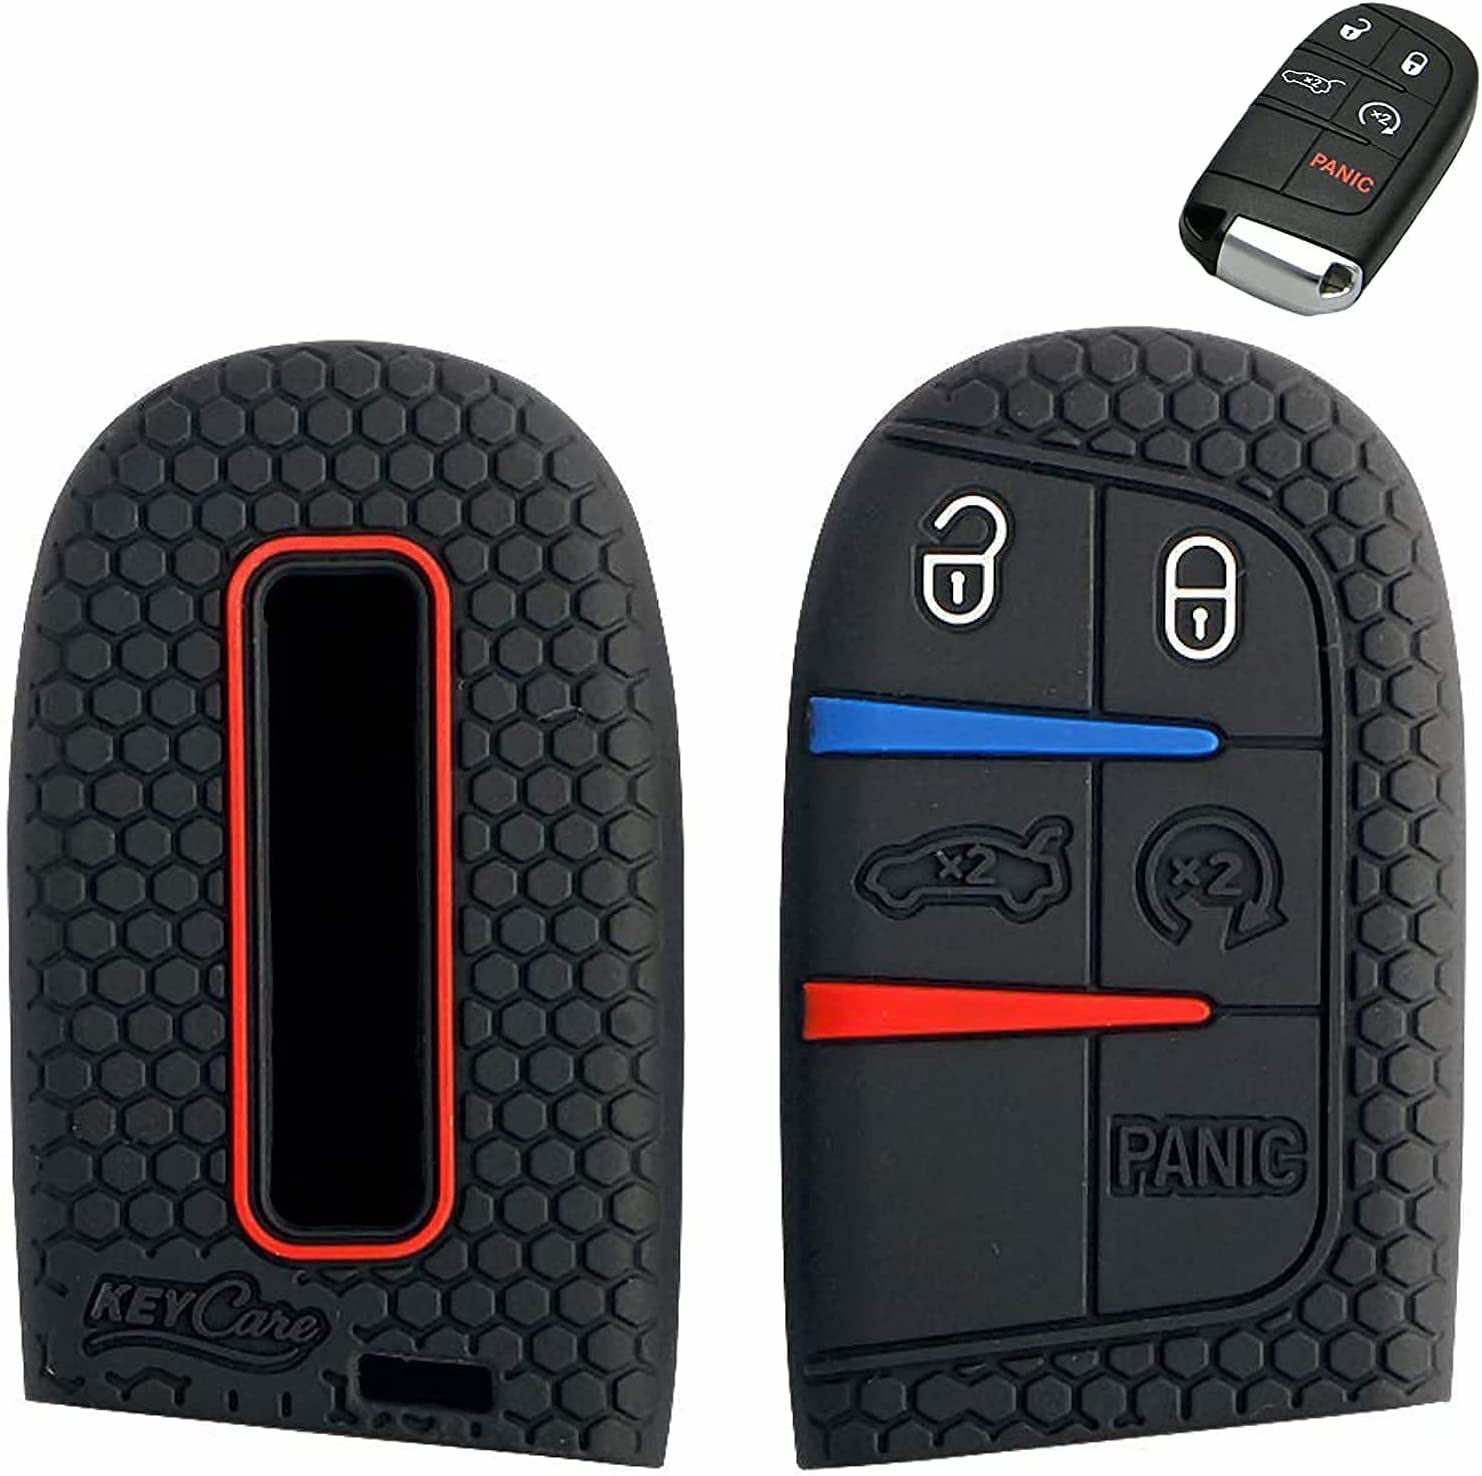 10 Best Key FOB Covers For Jeep Cherokee Wonderful Enginee